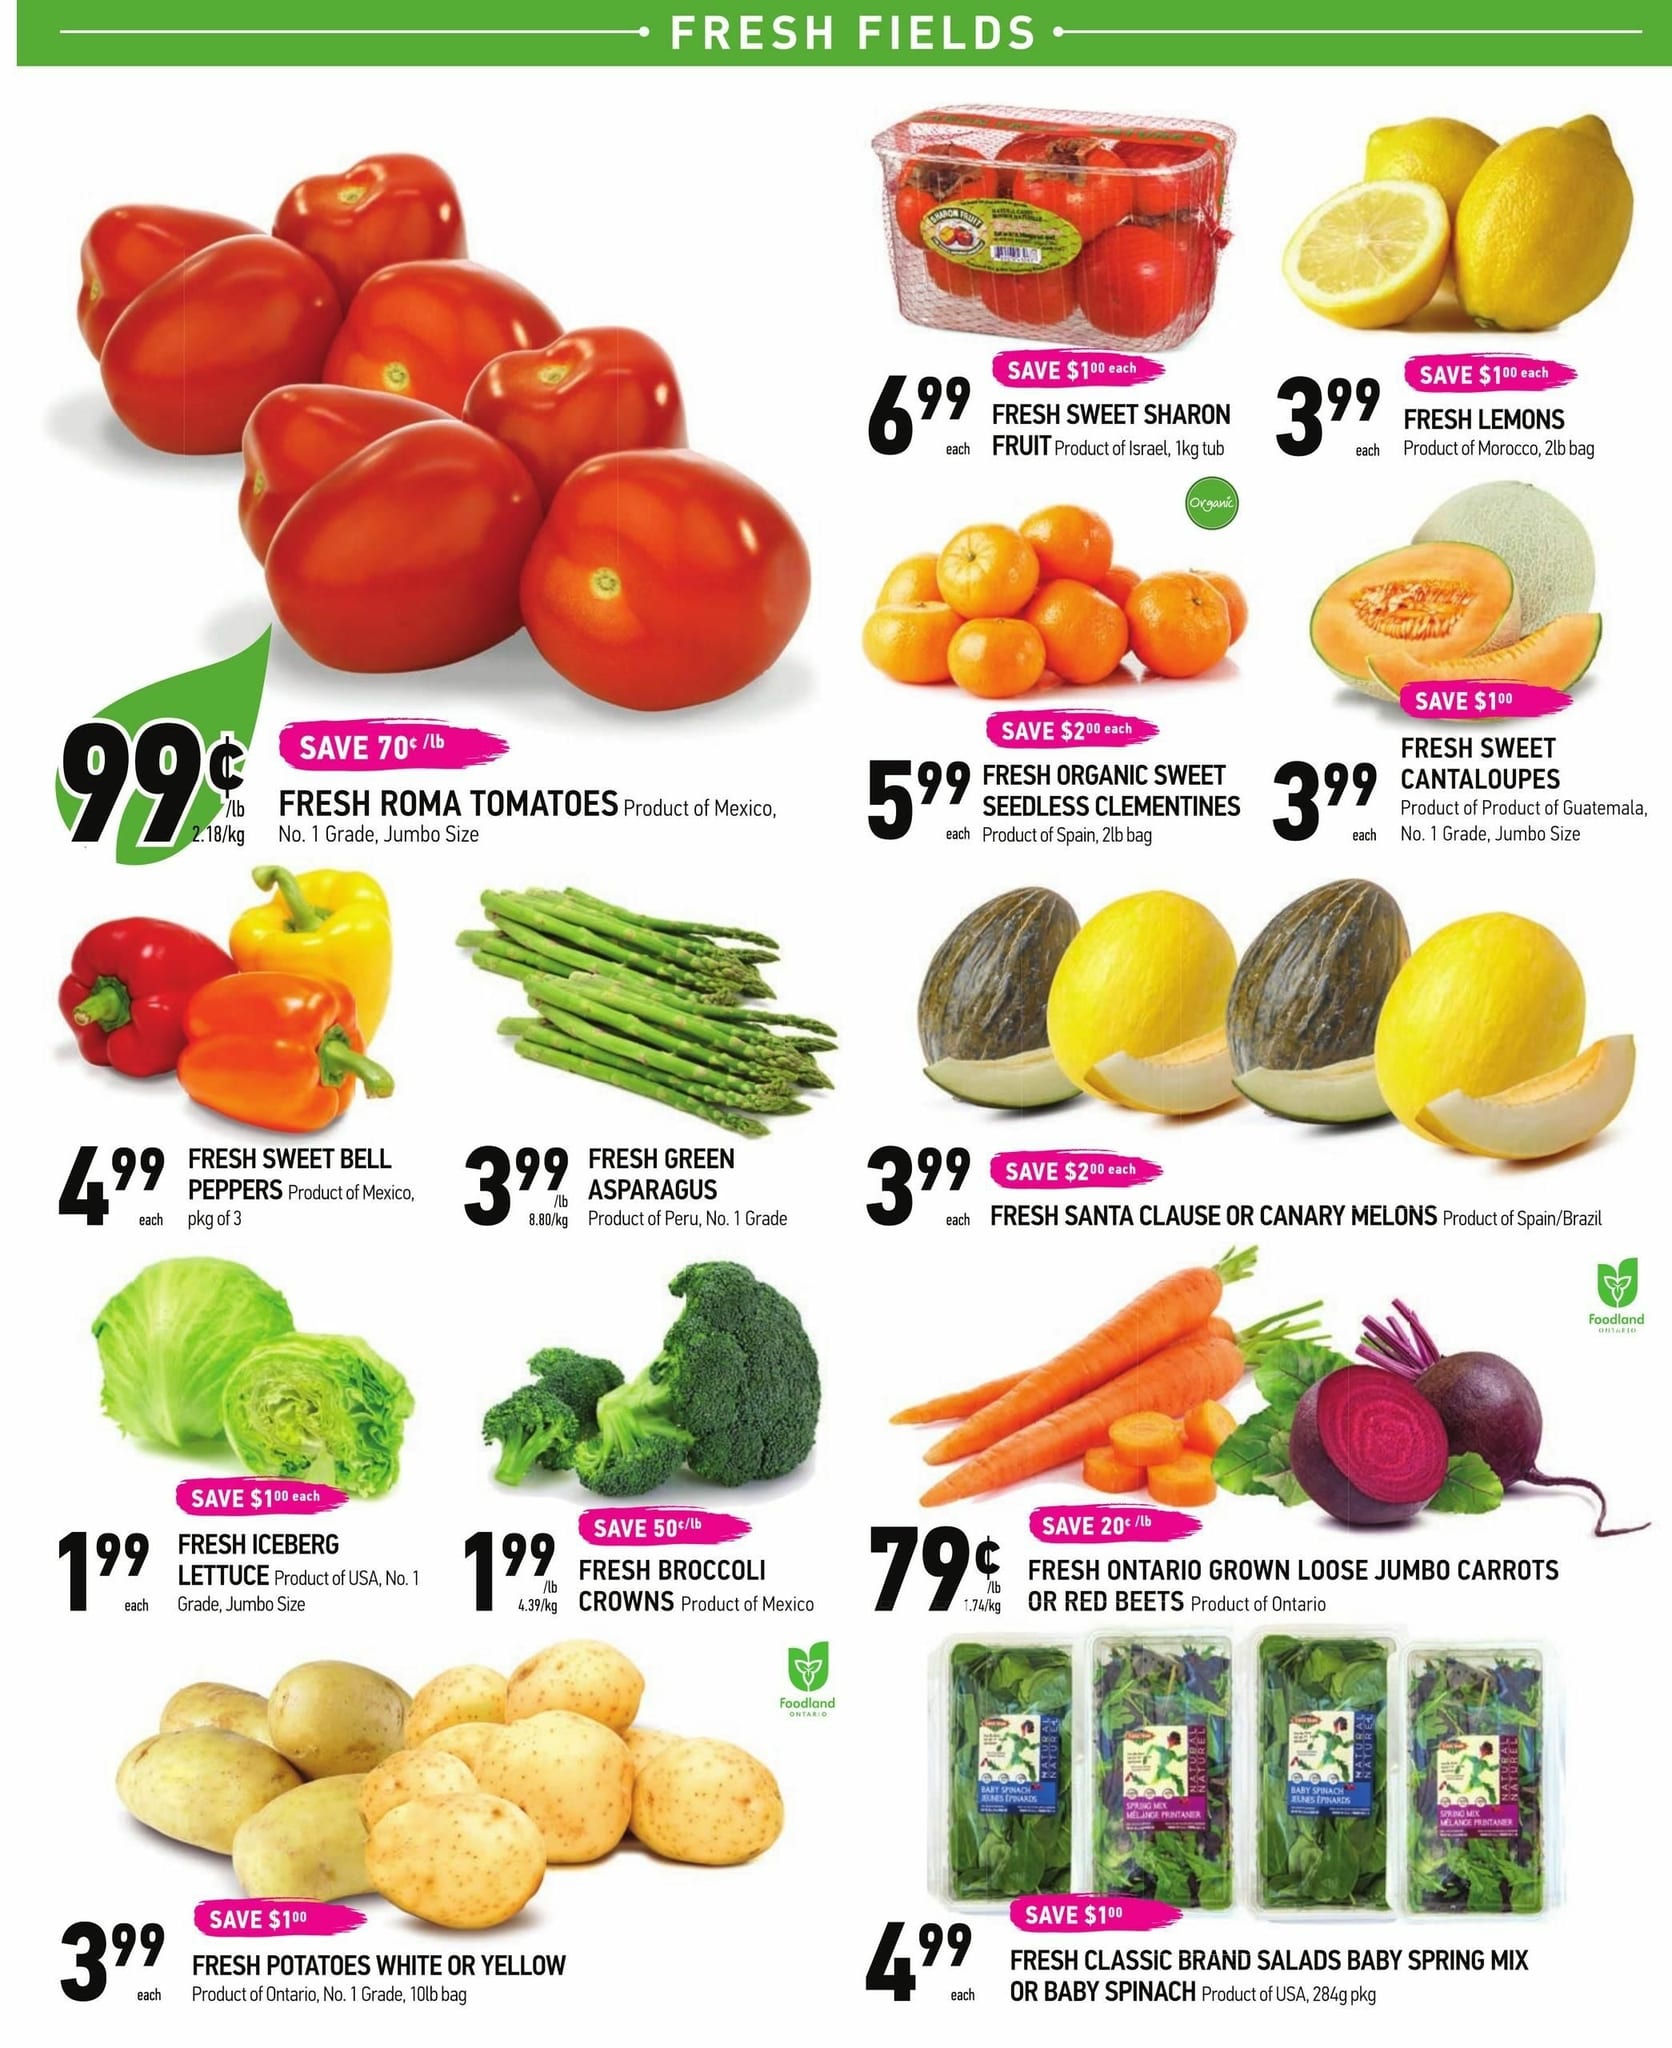 Coppa's Fresh Market - Weekly Flyer Specials - Page 2